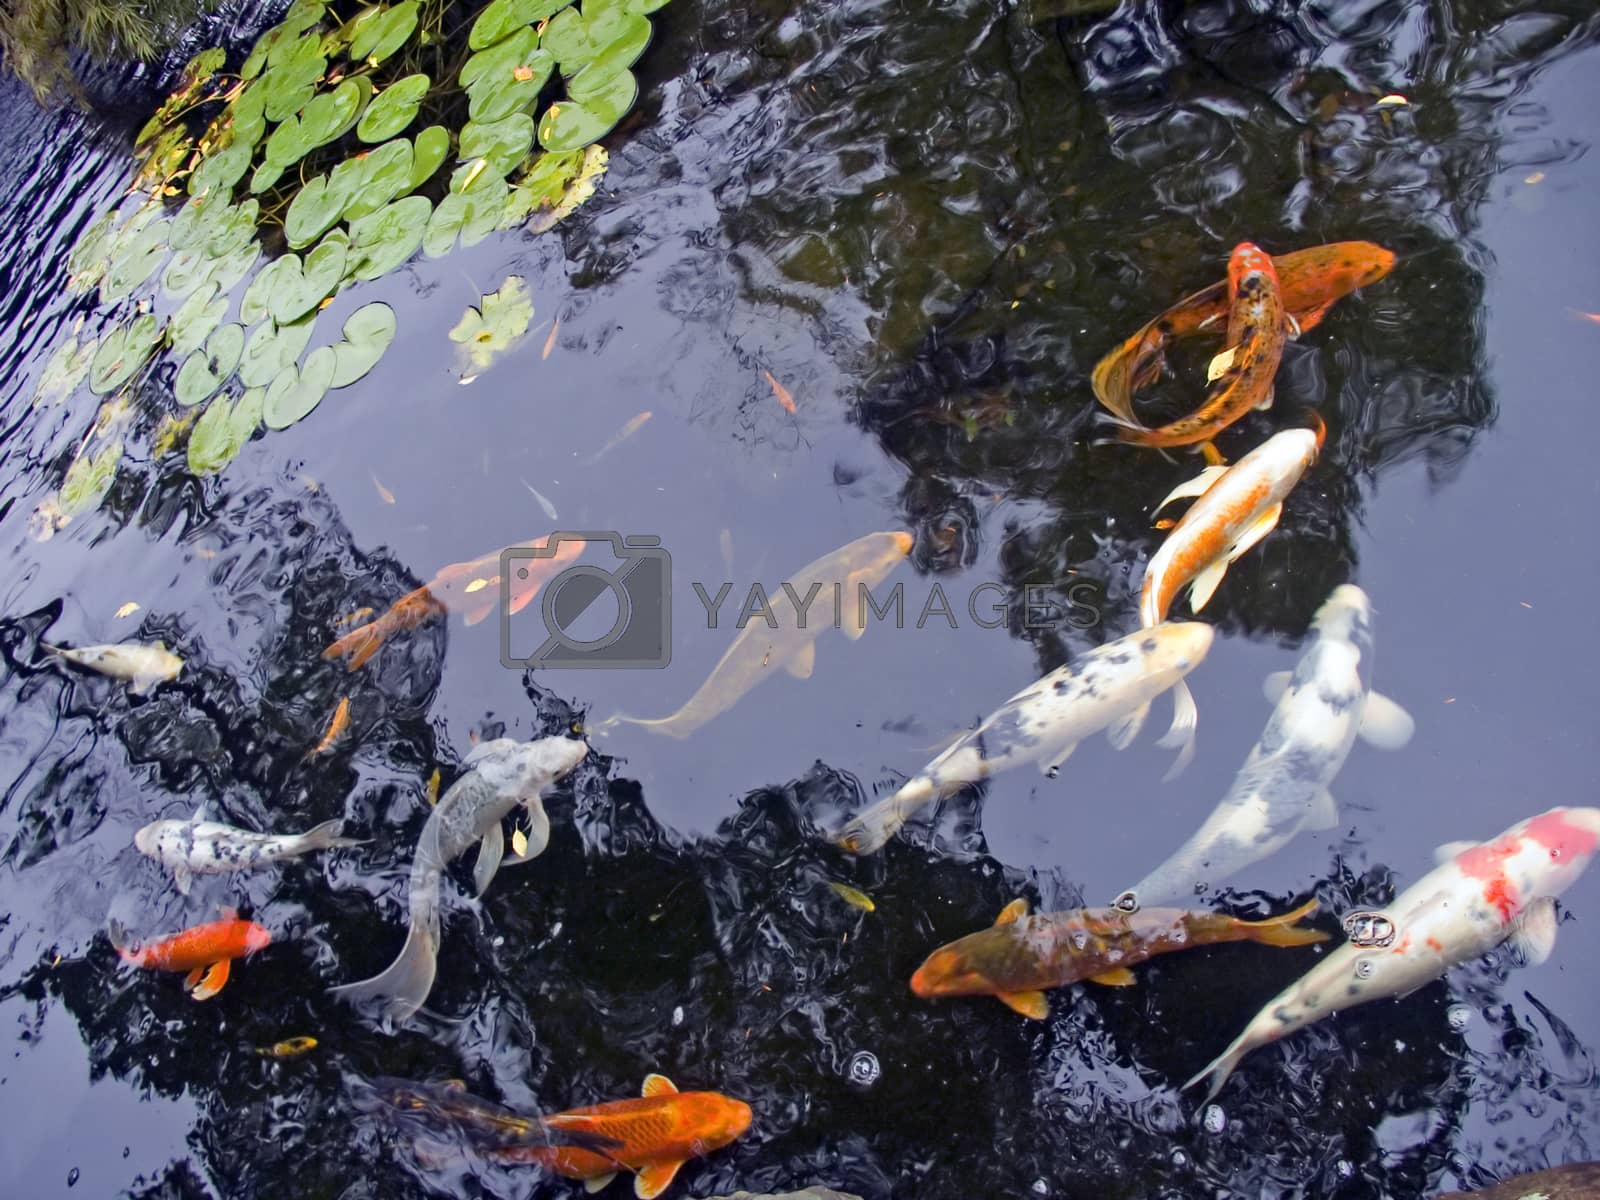 Royalty free image of Carp fish by applesstock